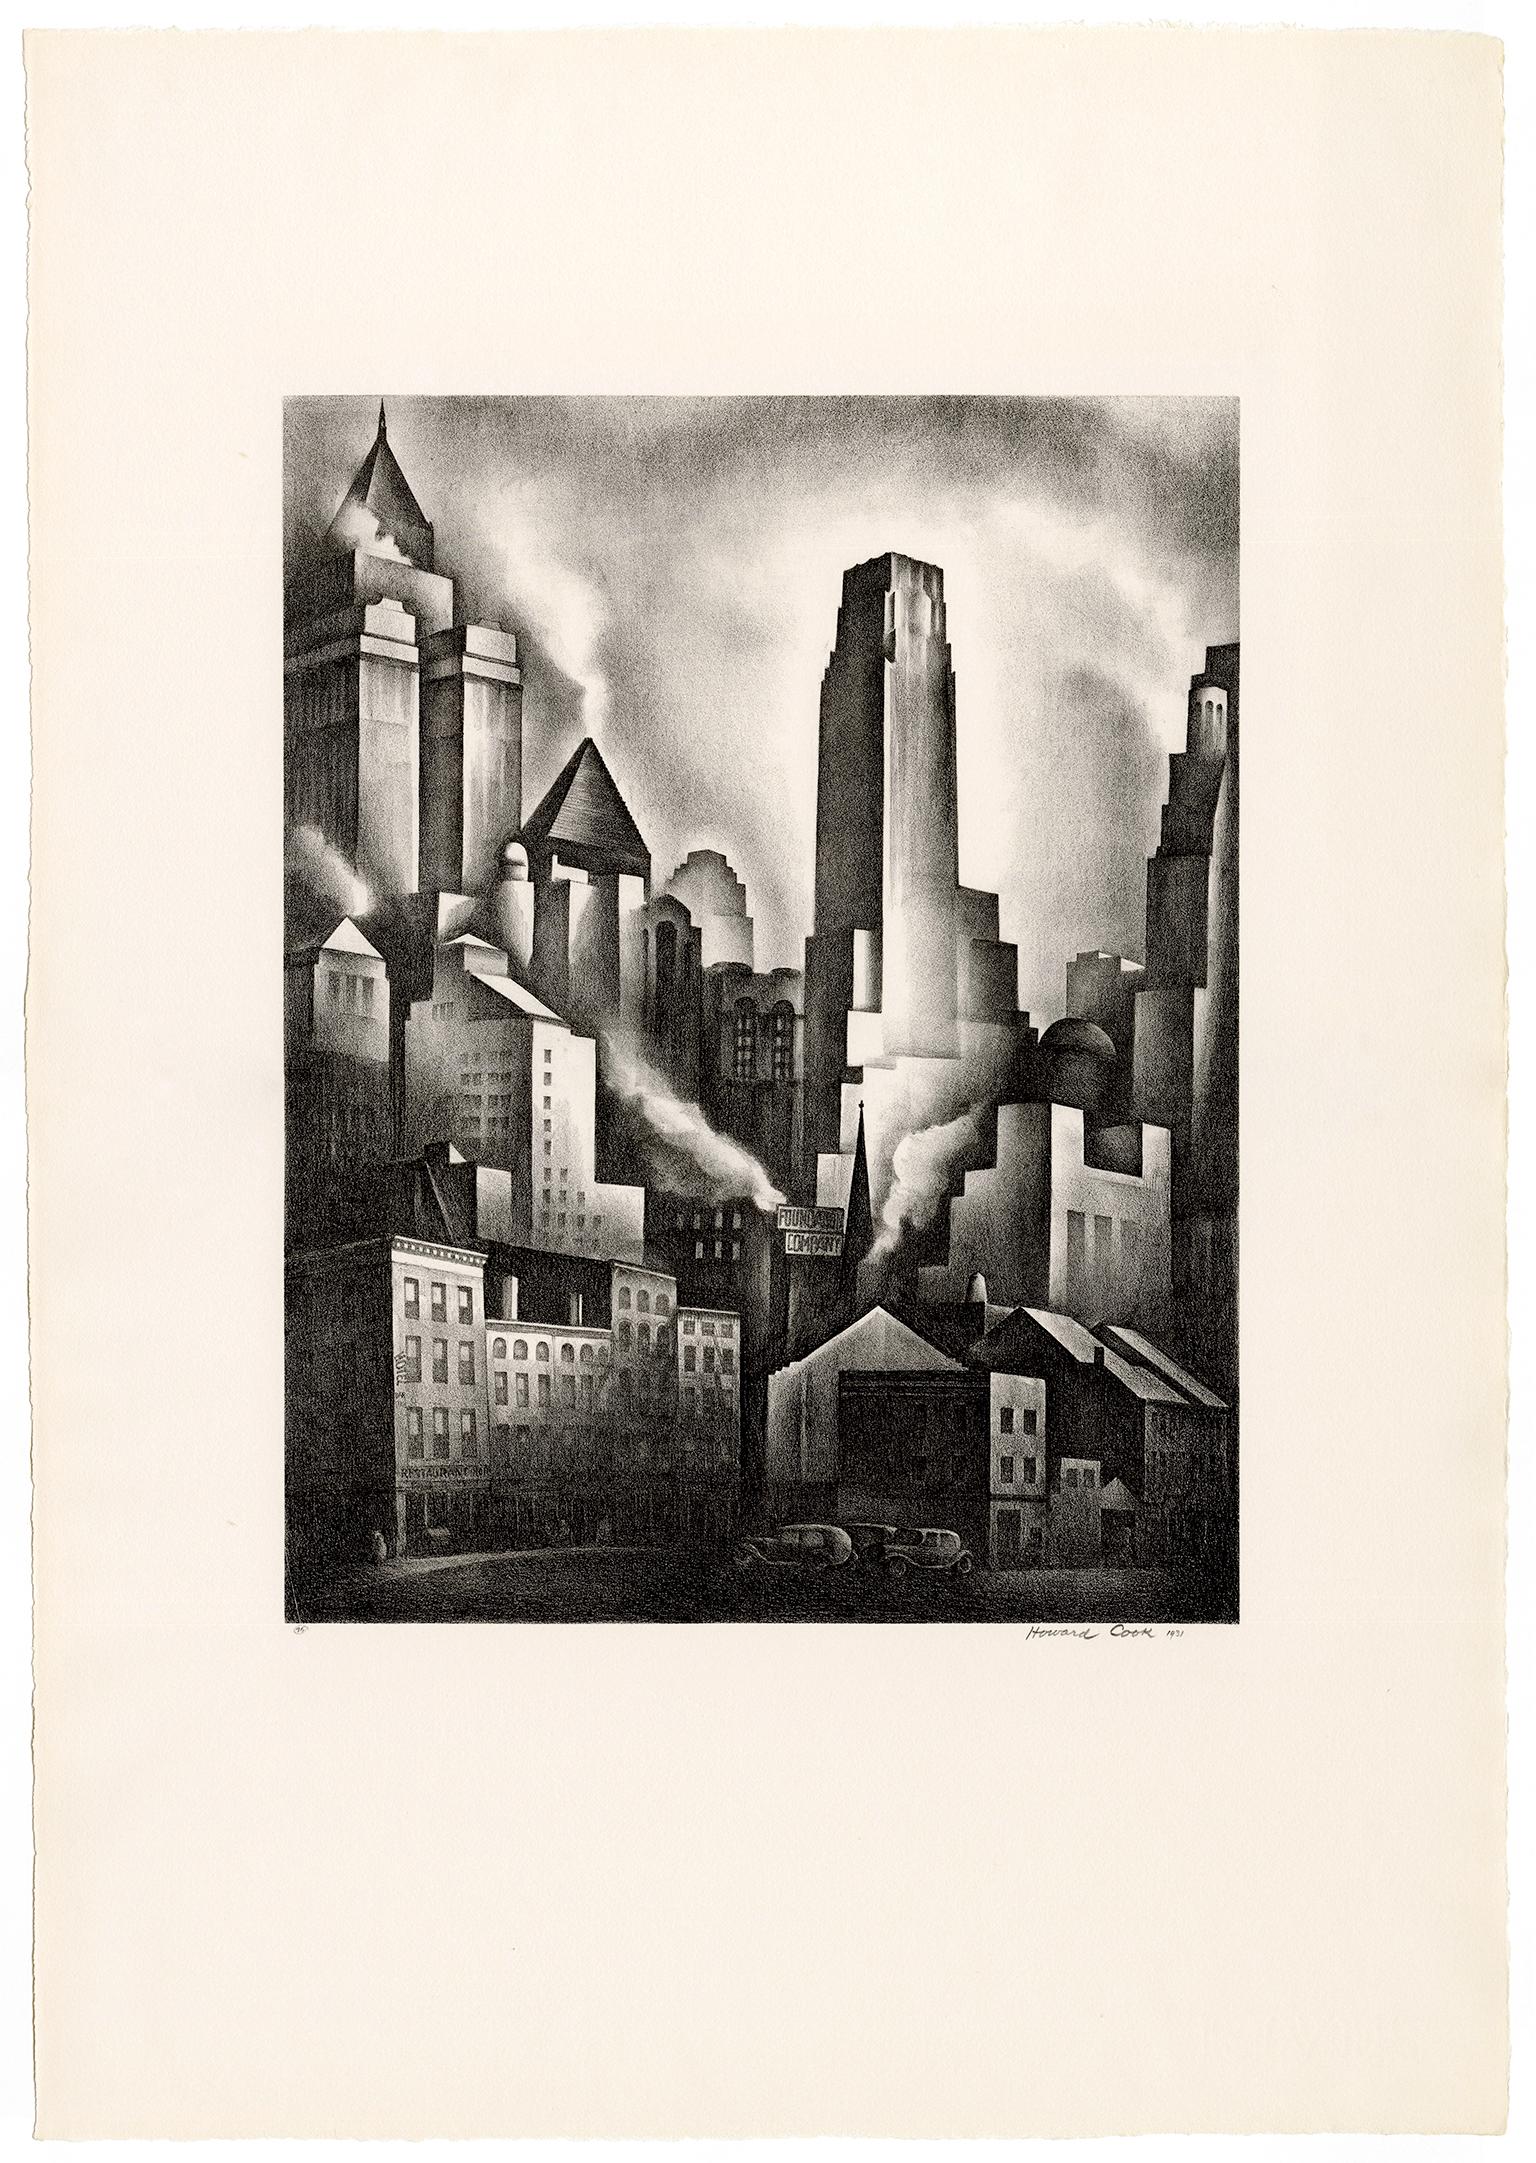 'Financial District', New York City — 1930s American Modernism - Print by Howard Norton Cook